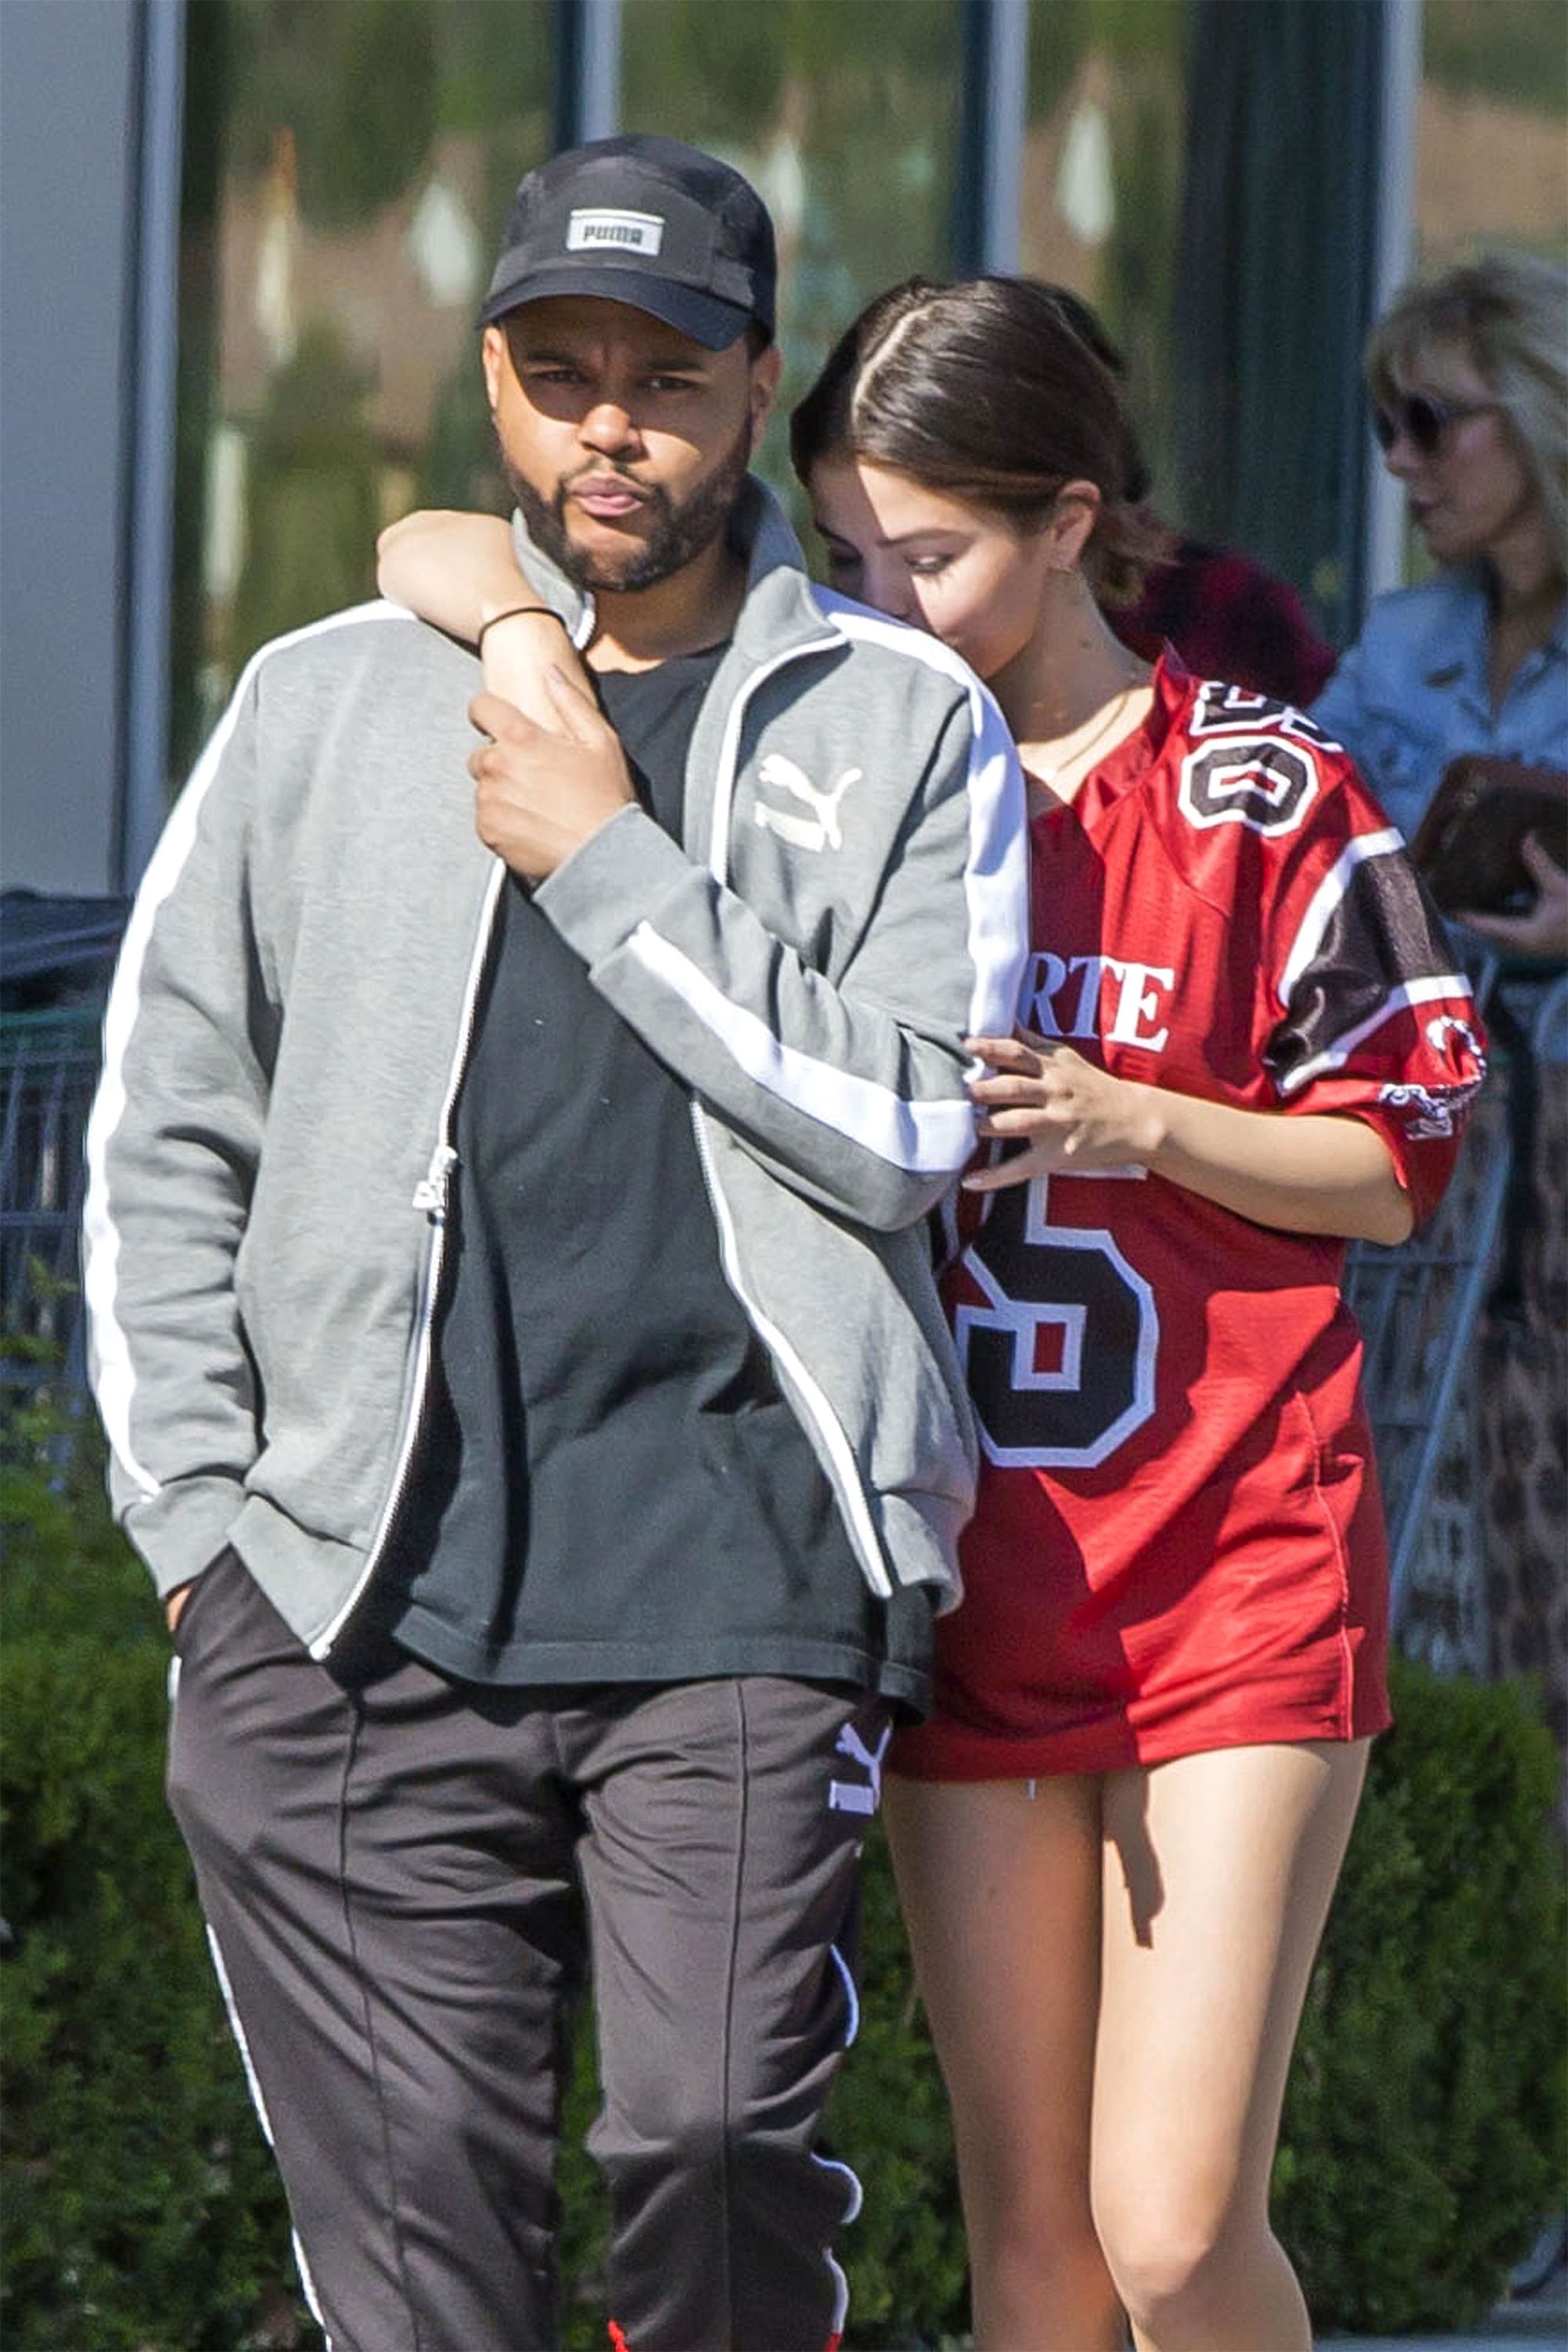 Selena Gomez No Pants with The Weeknd - Selena Gomez and The Weeknd